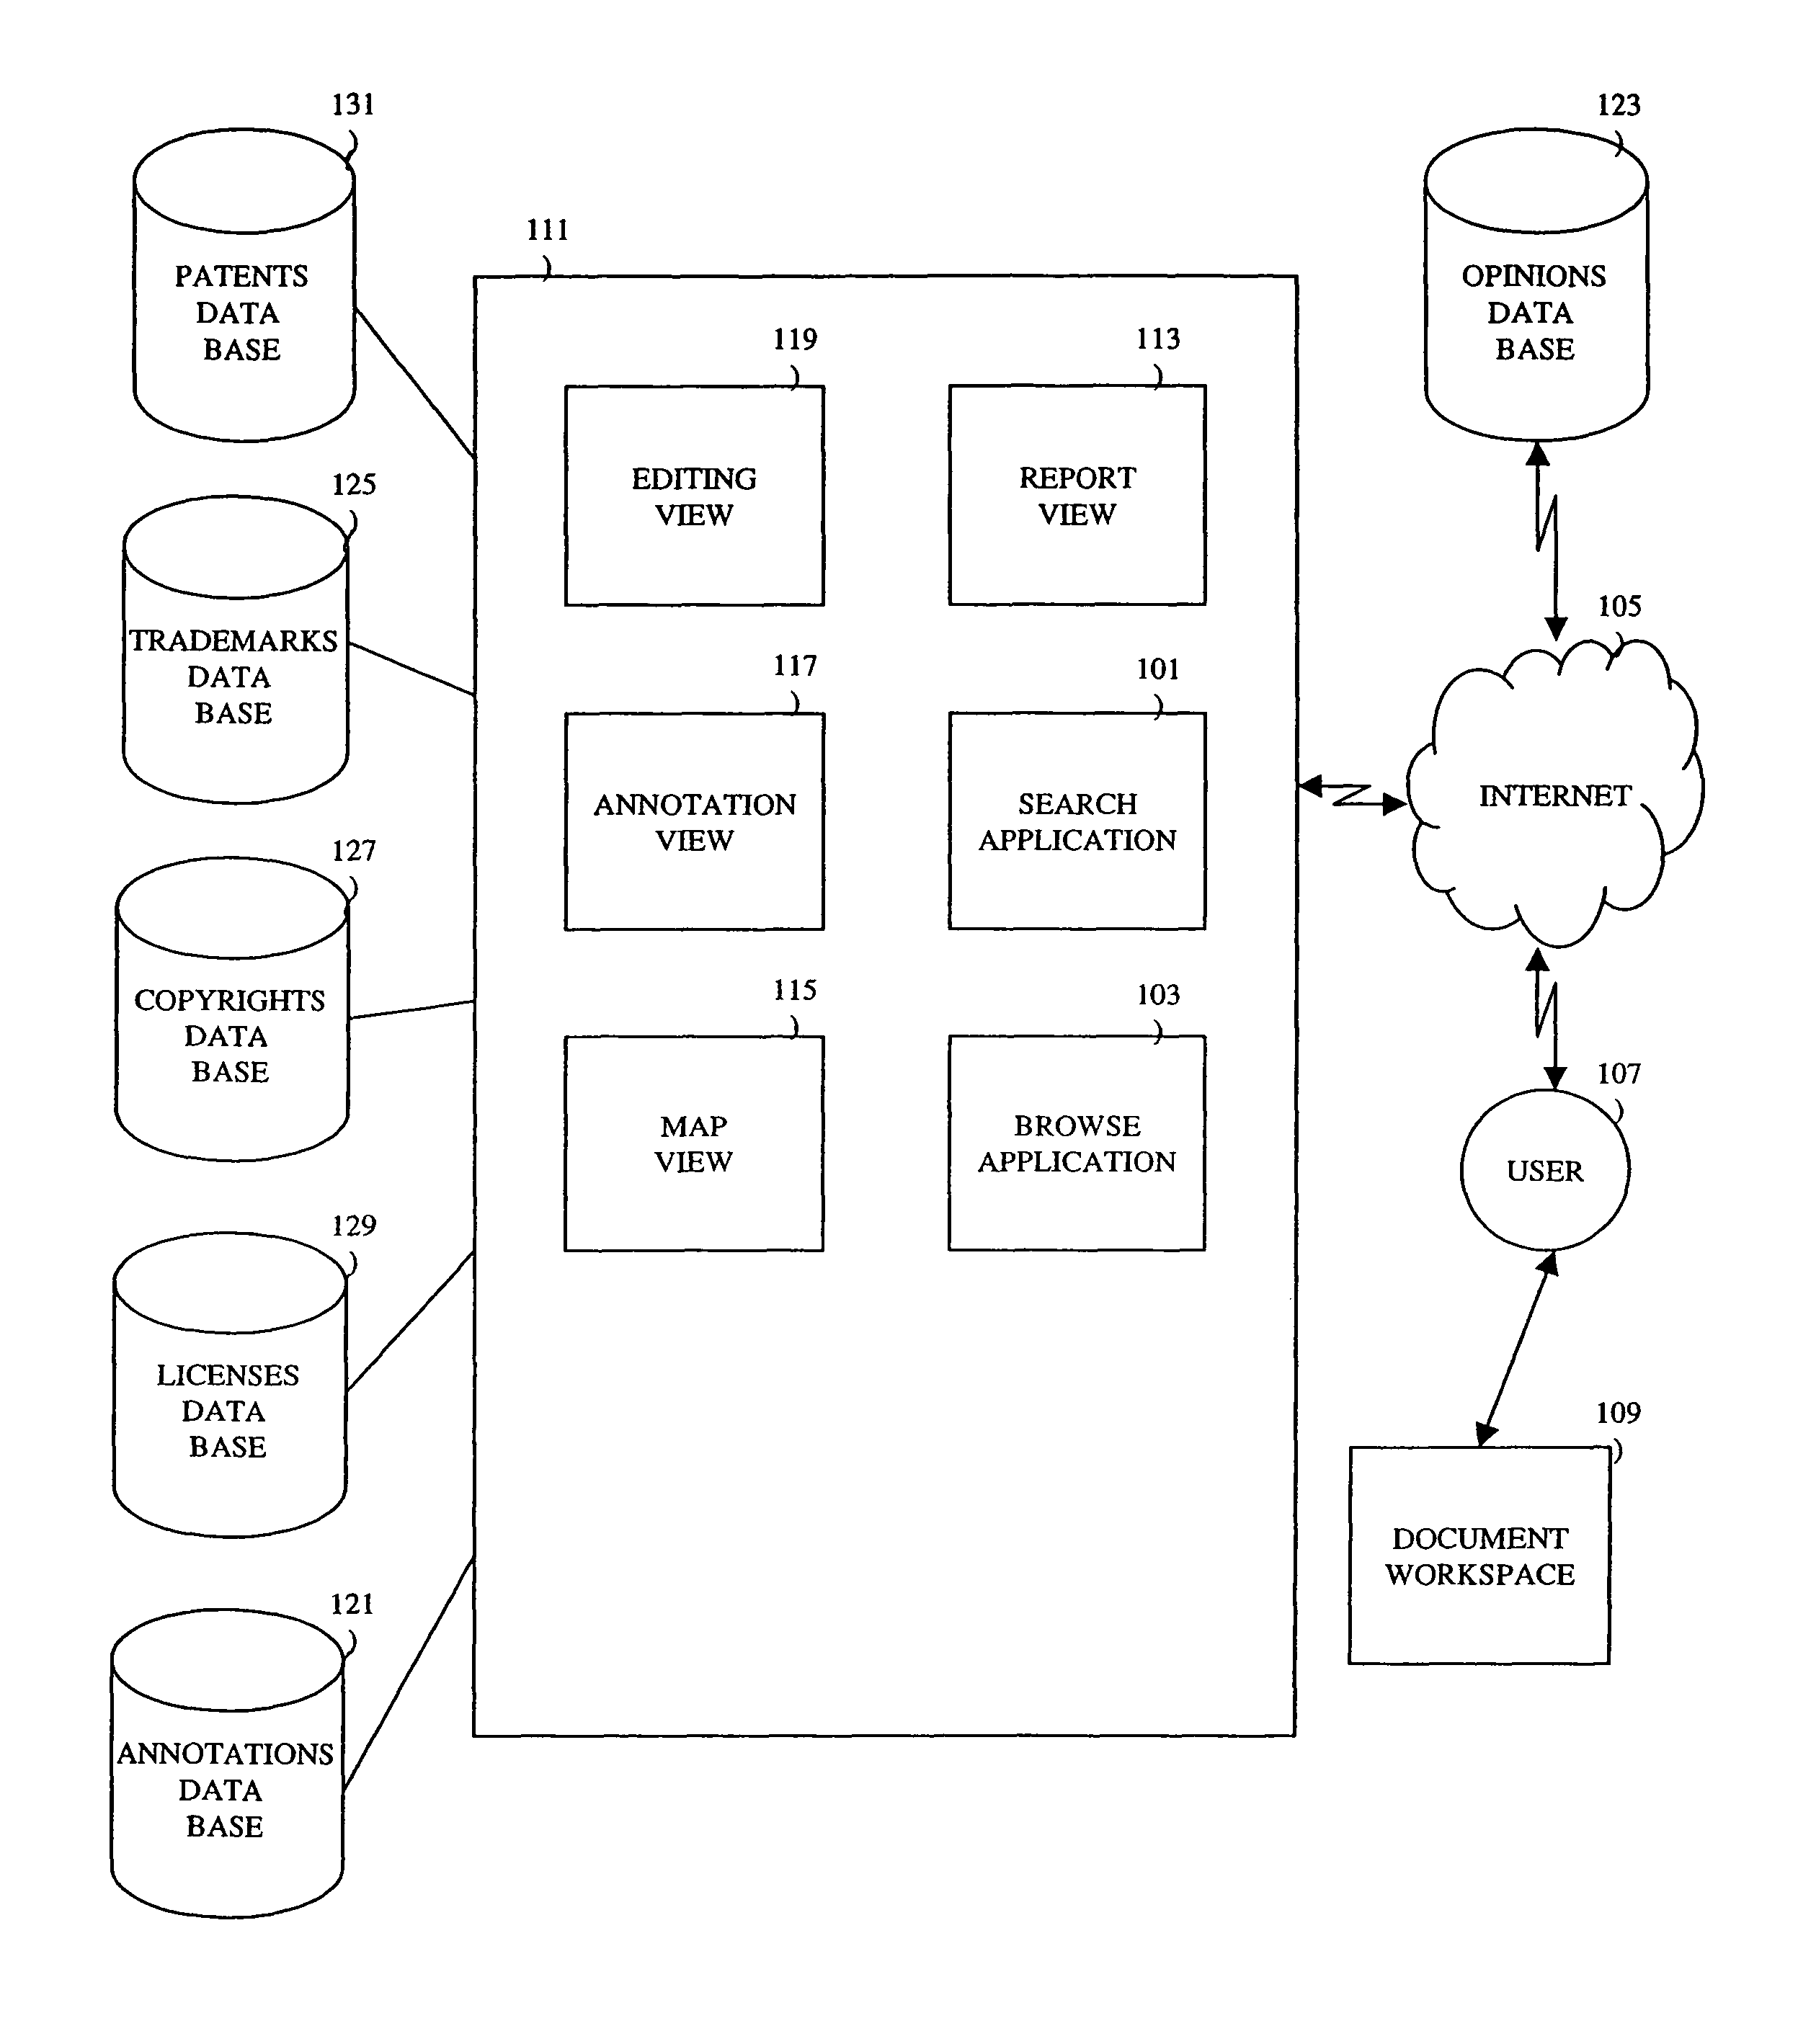 Computer assisted and/or implemented process and system for annotating and/or linking documents and data, optionally in an intellectual property management system